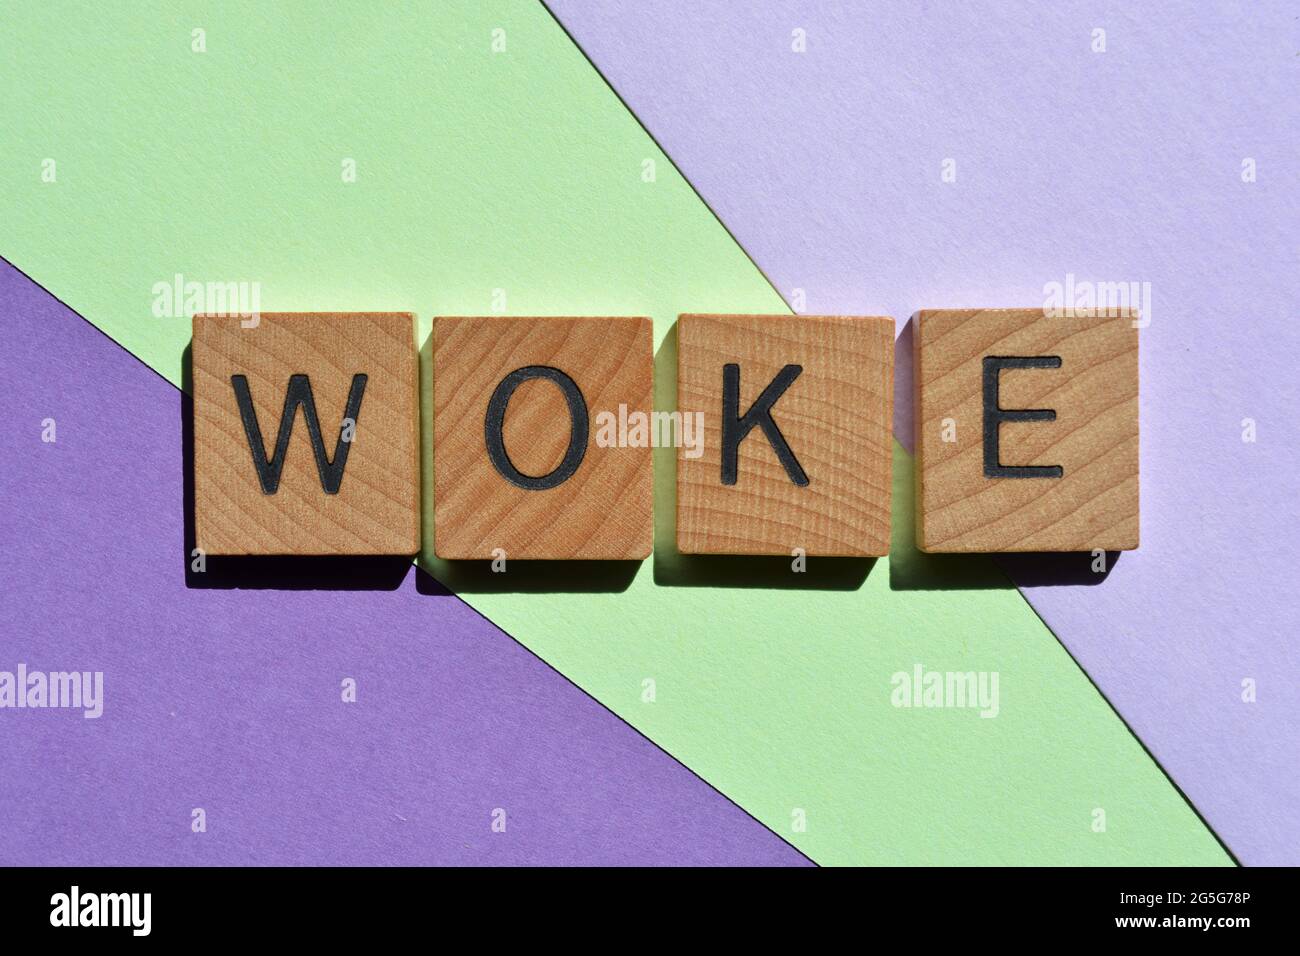 Woke, word in wooden alphabet letters isolated on green and purple background Stock Photo